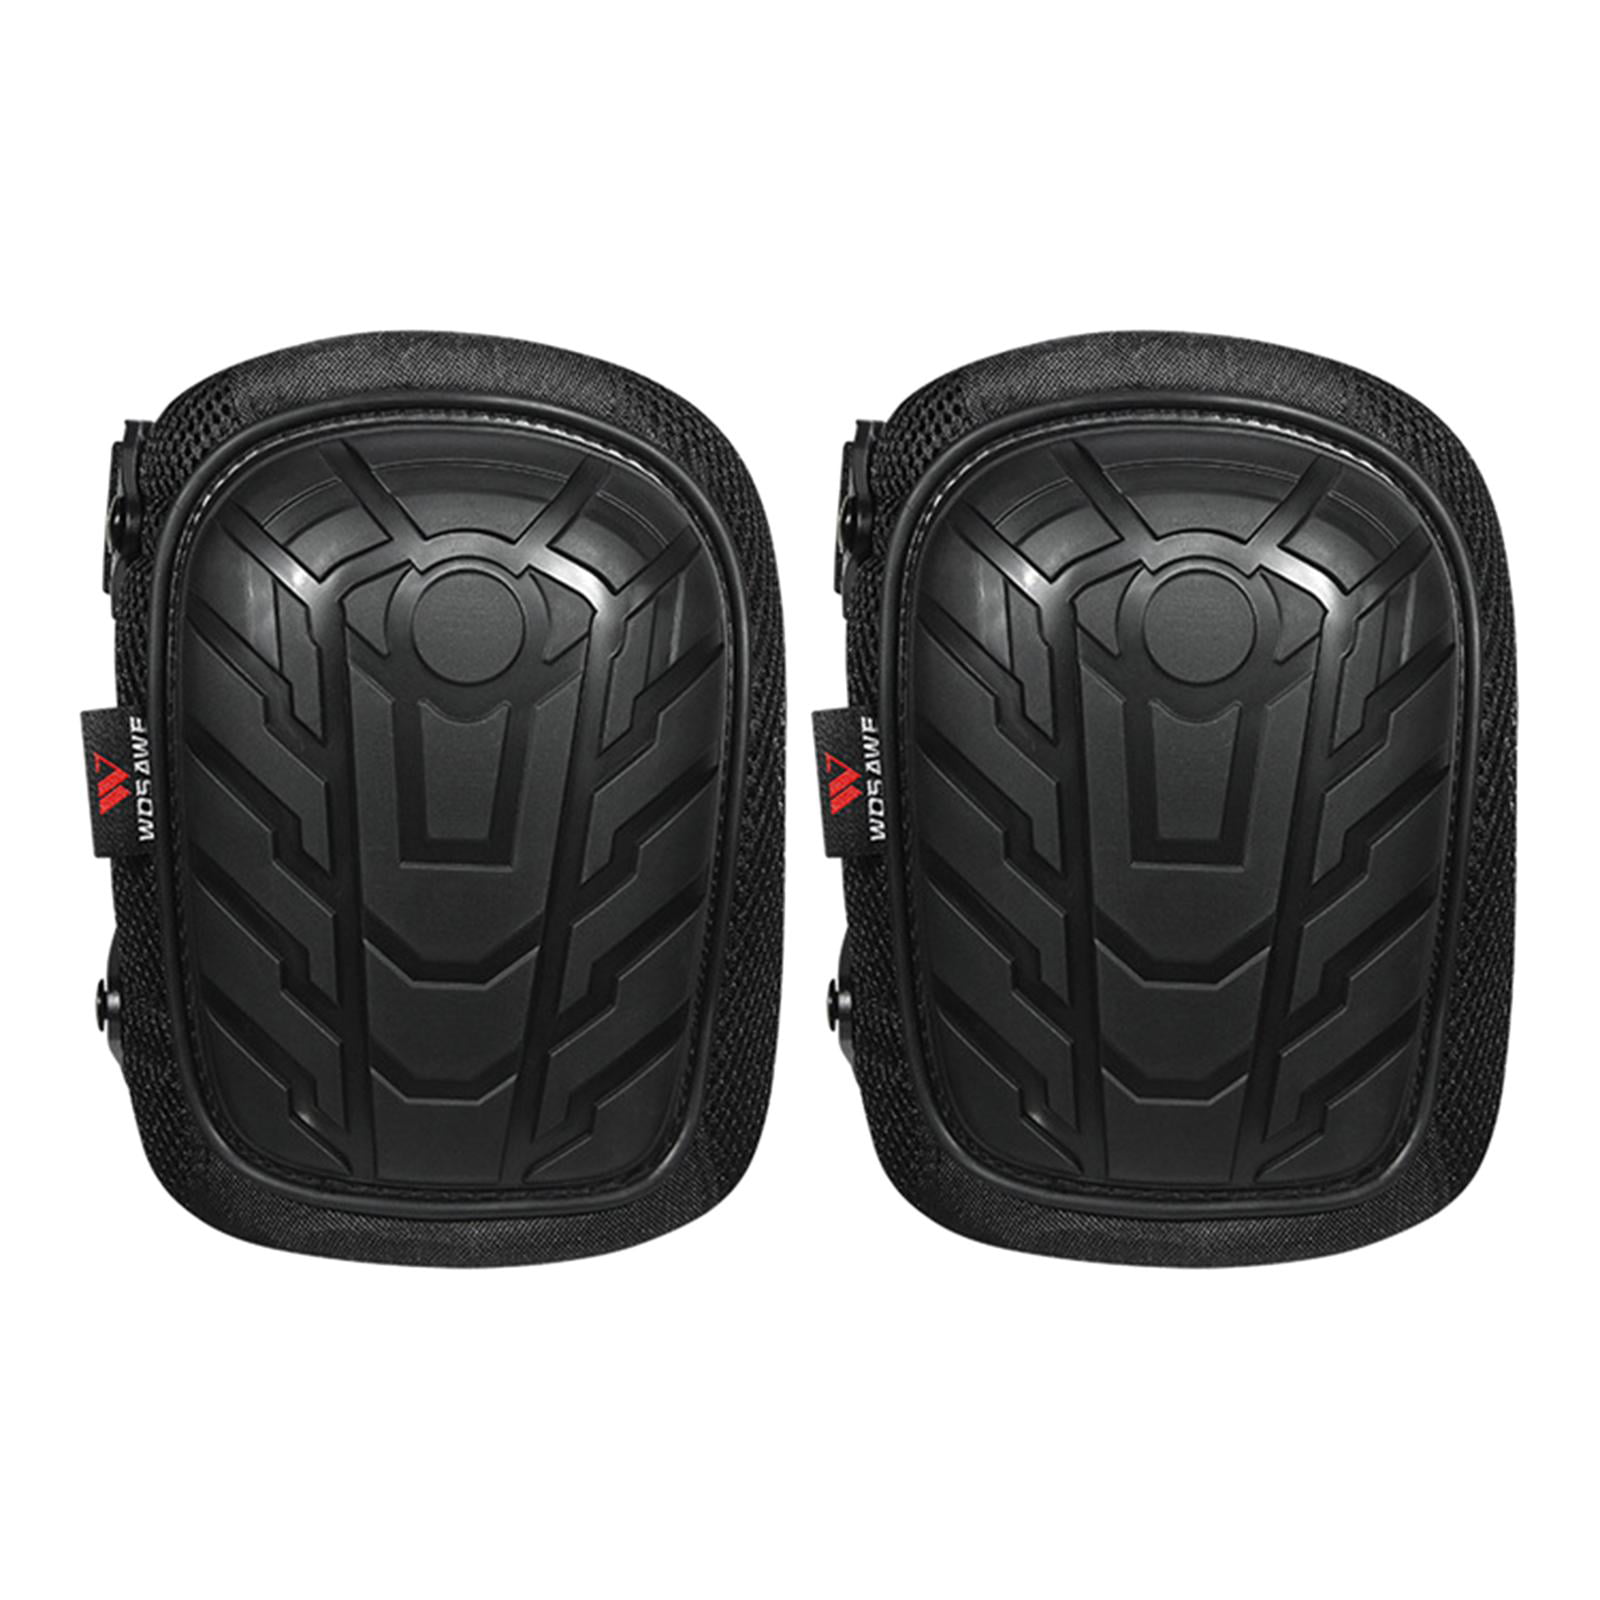 Motorcycle Motocross Knee Shin Leg Guard Pad Protector Shockproof For Cycling 